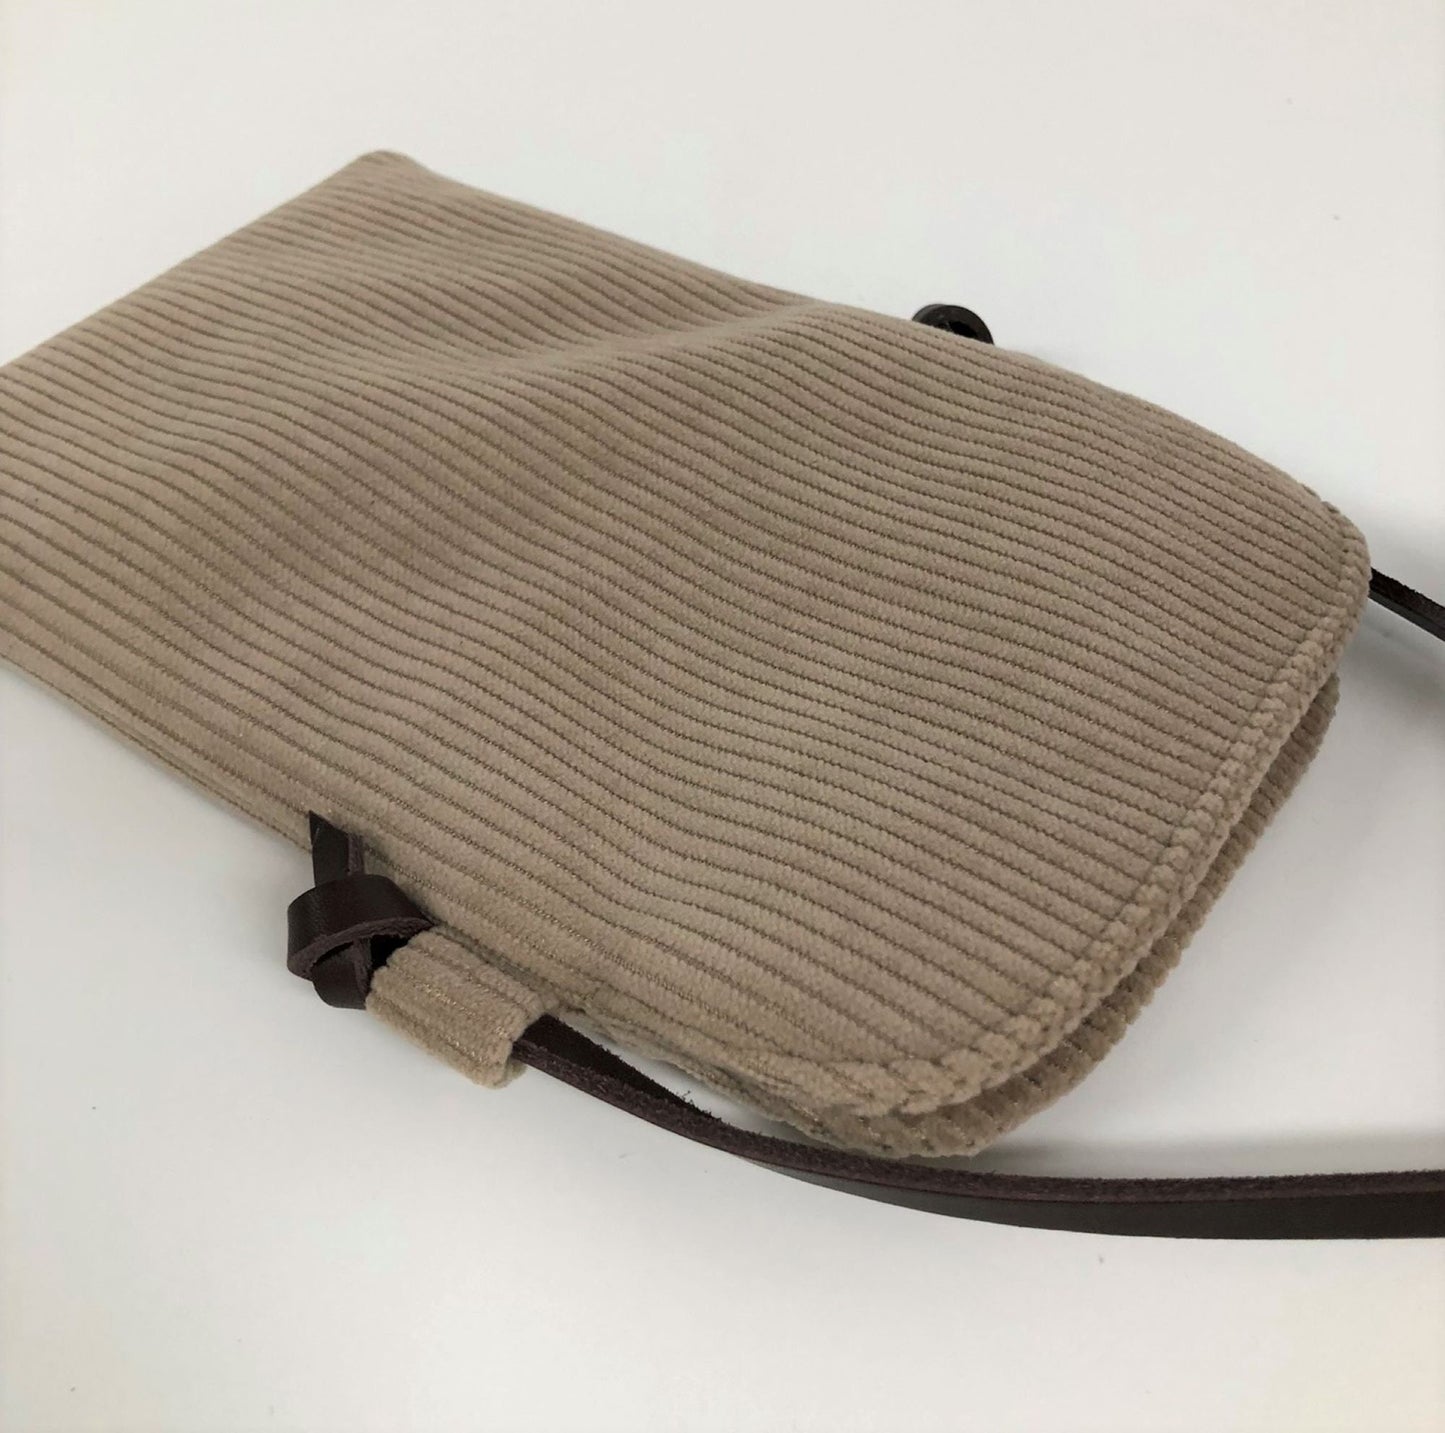 Crossbody phone pouch in beige corduroy and leather